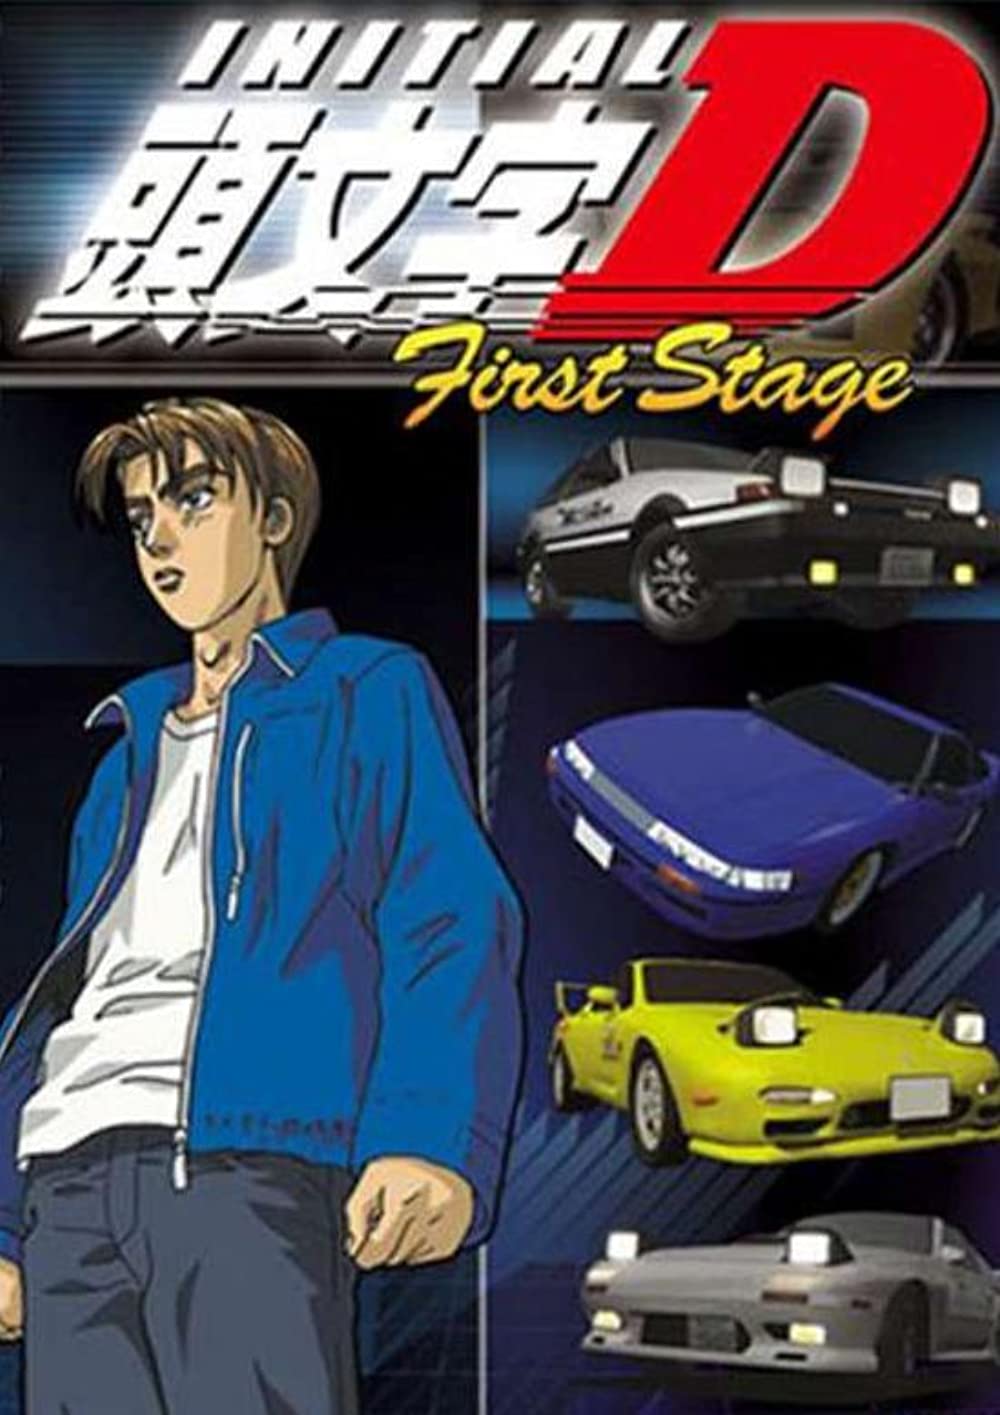 how many seasons of initial d